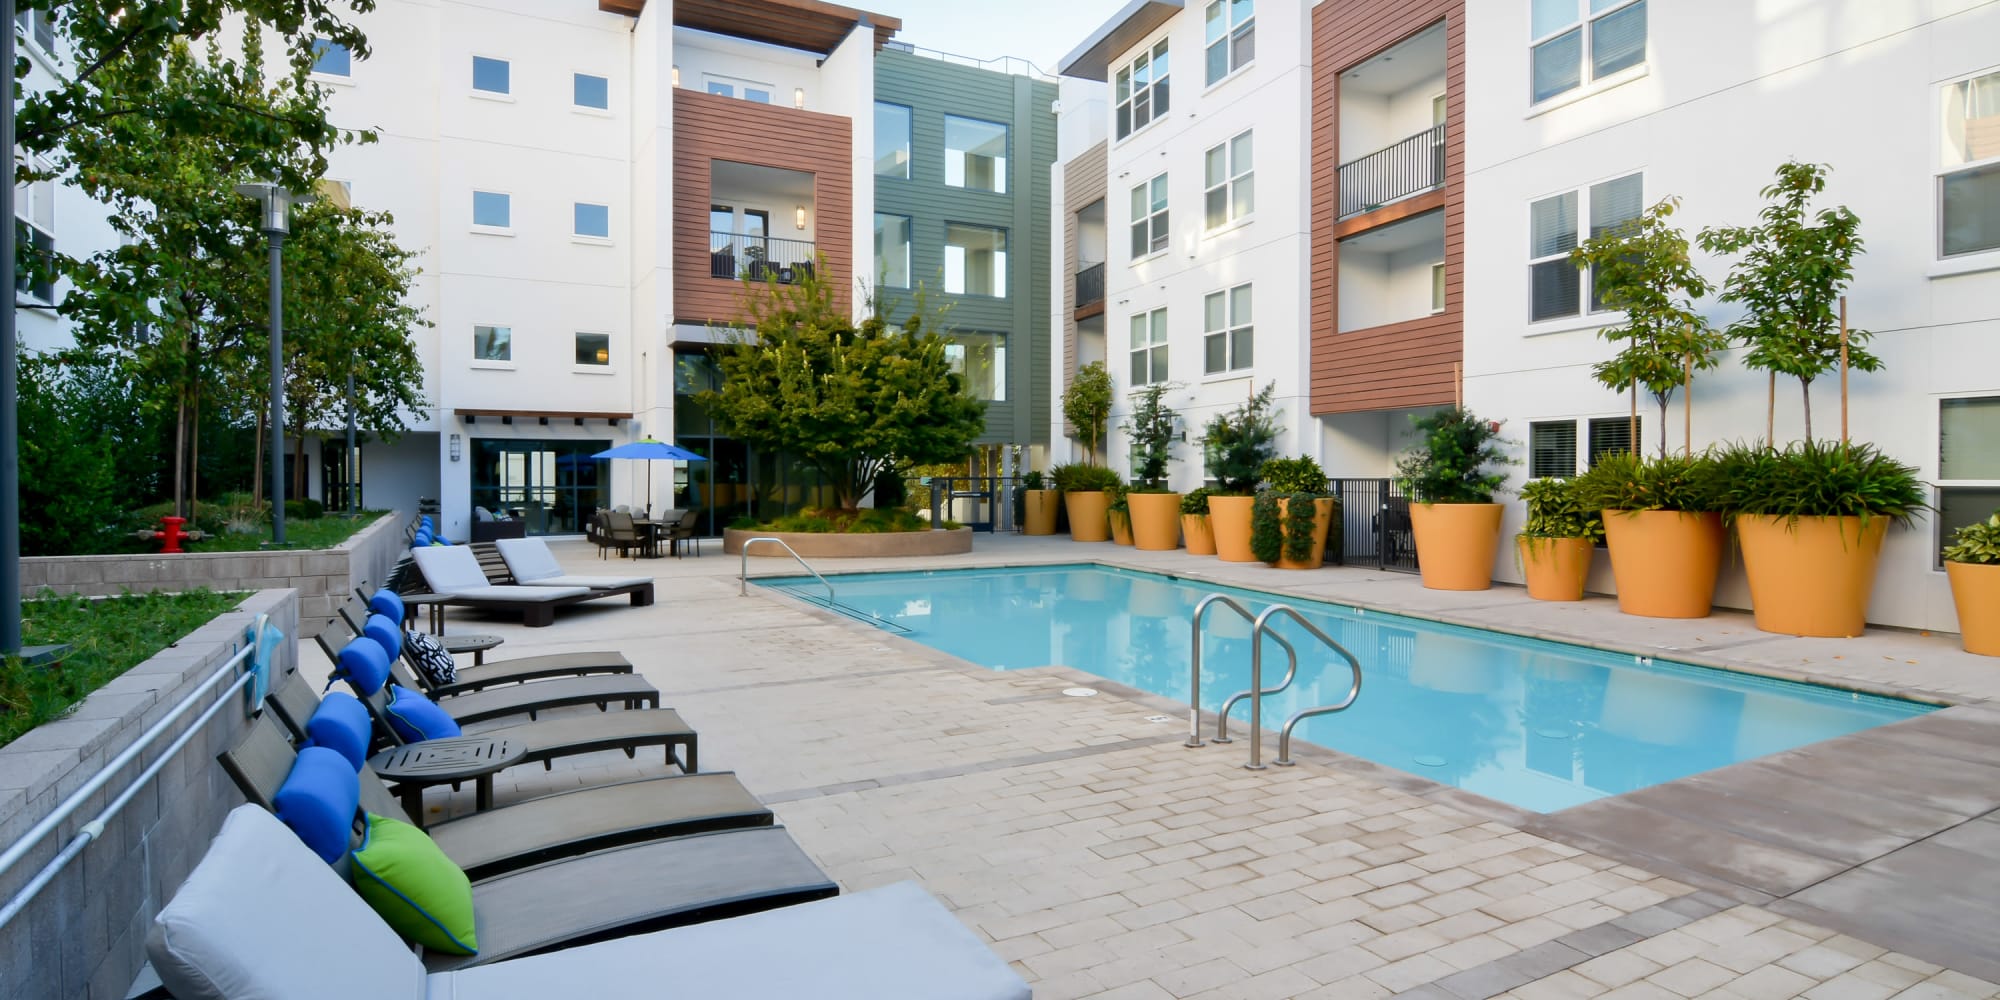 Apartments in Mountain View, California, at Domus on the Boulevard